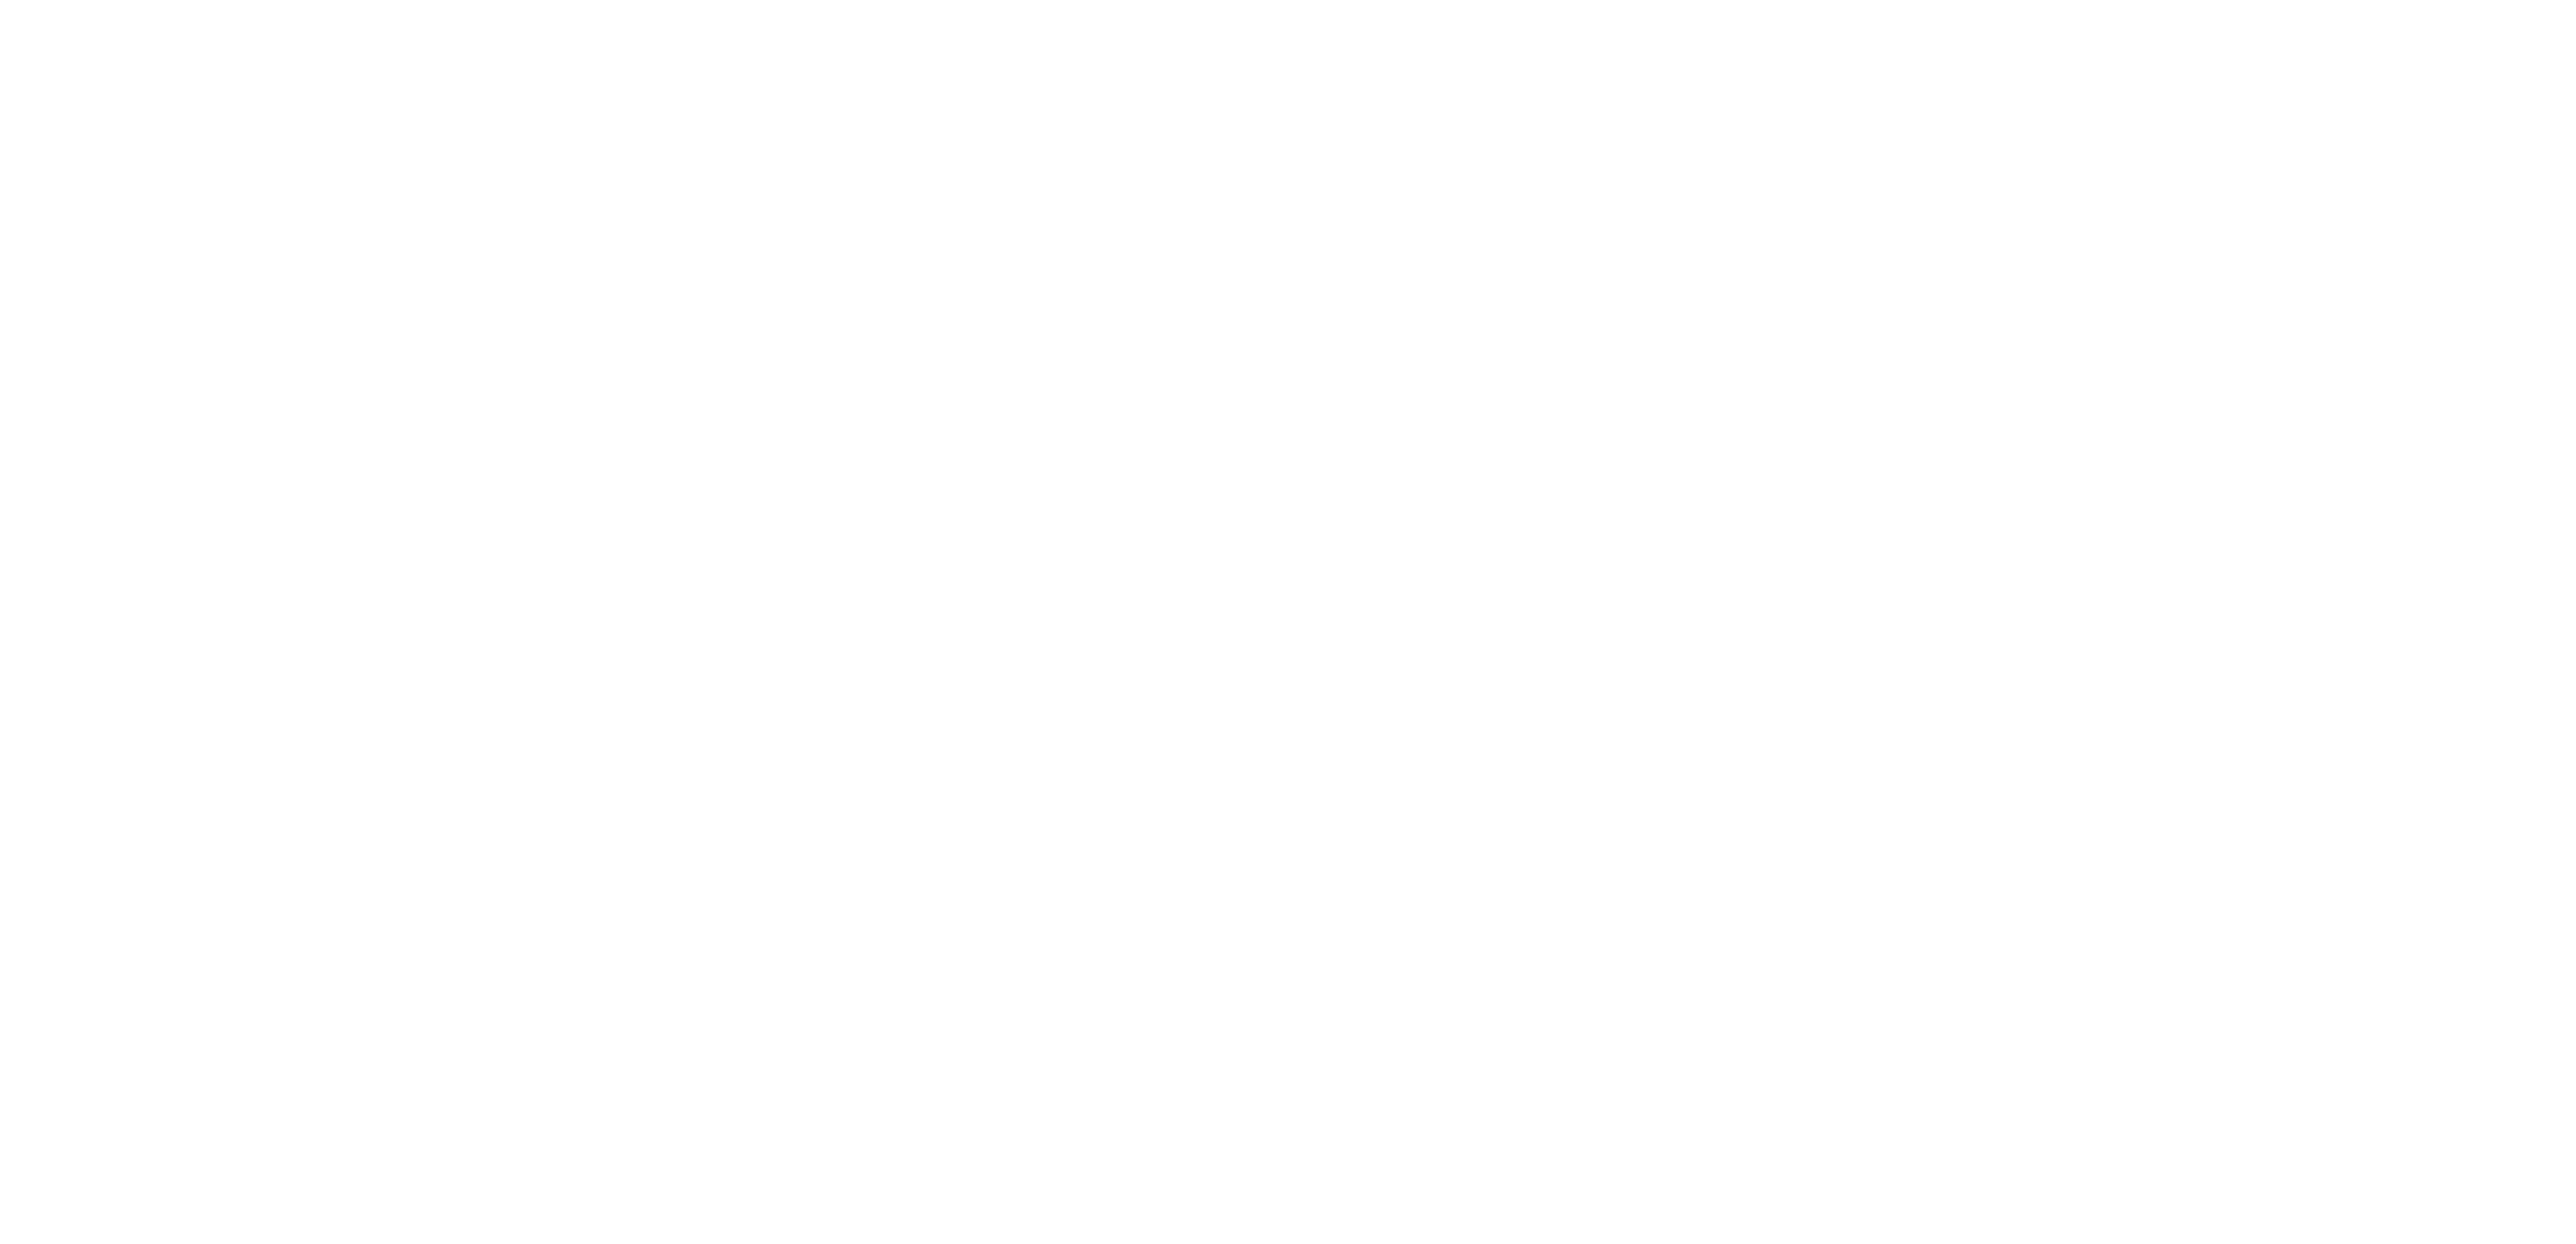 Pall Logo - Life Science and Industrial Filtration Leader Opts for Hybrid IT